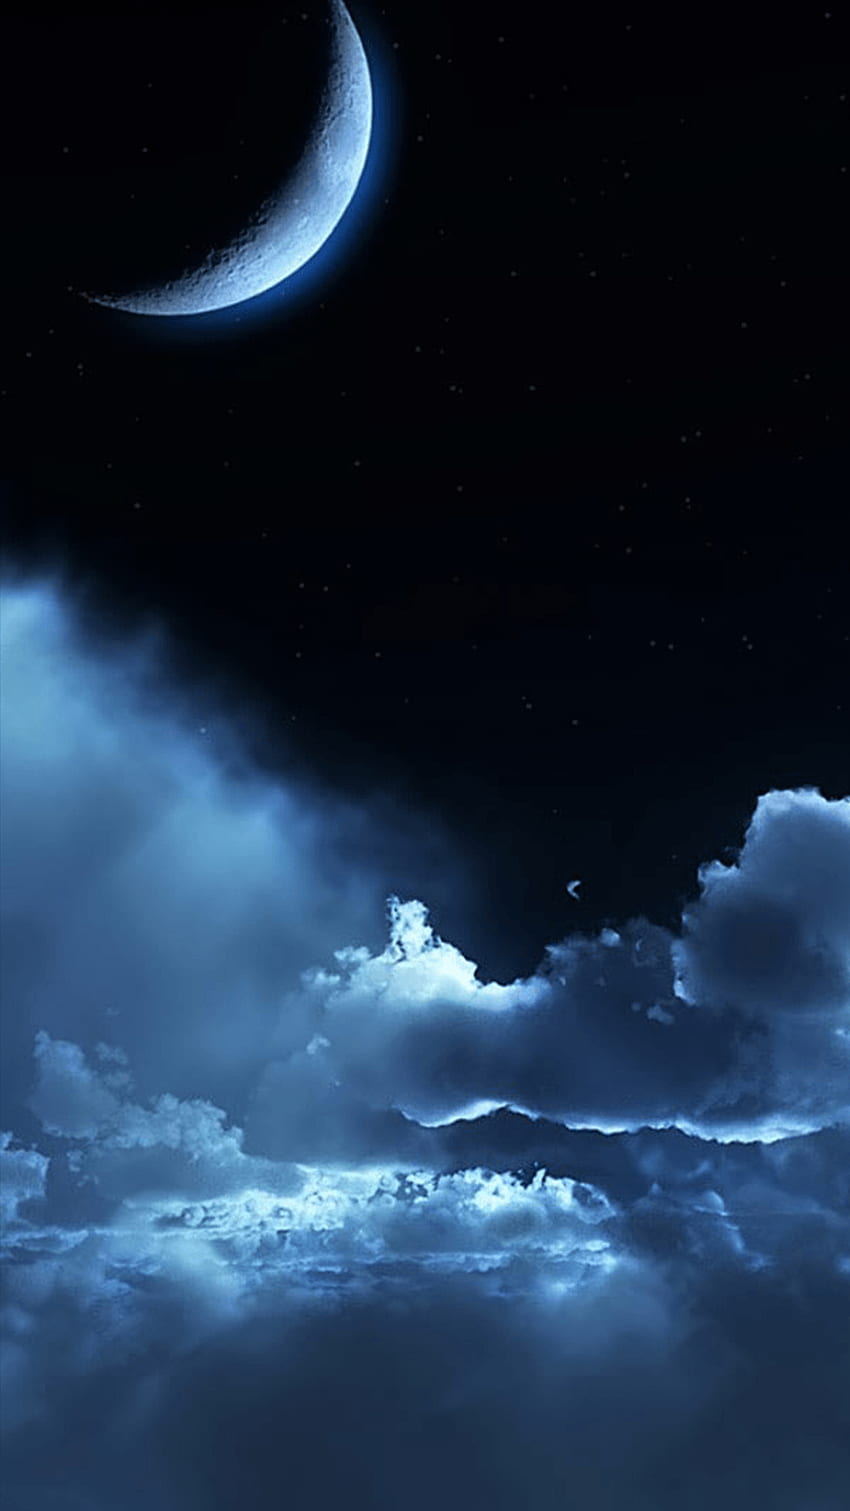 Ultra Night Sky For Your Mobile Phone .0189, At Night Sky HD phone wallpaper